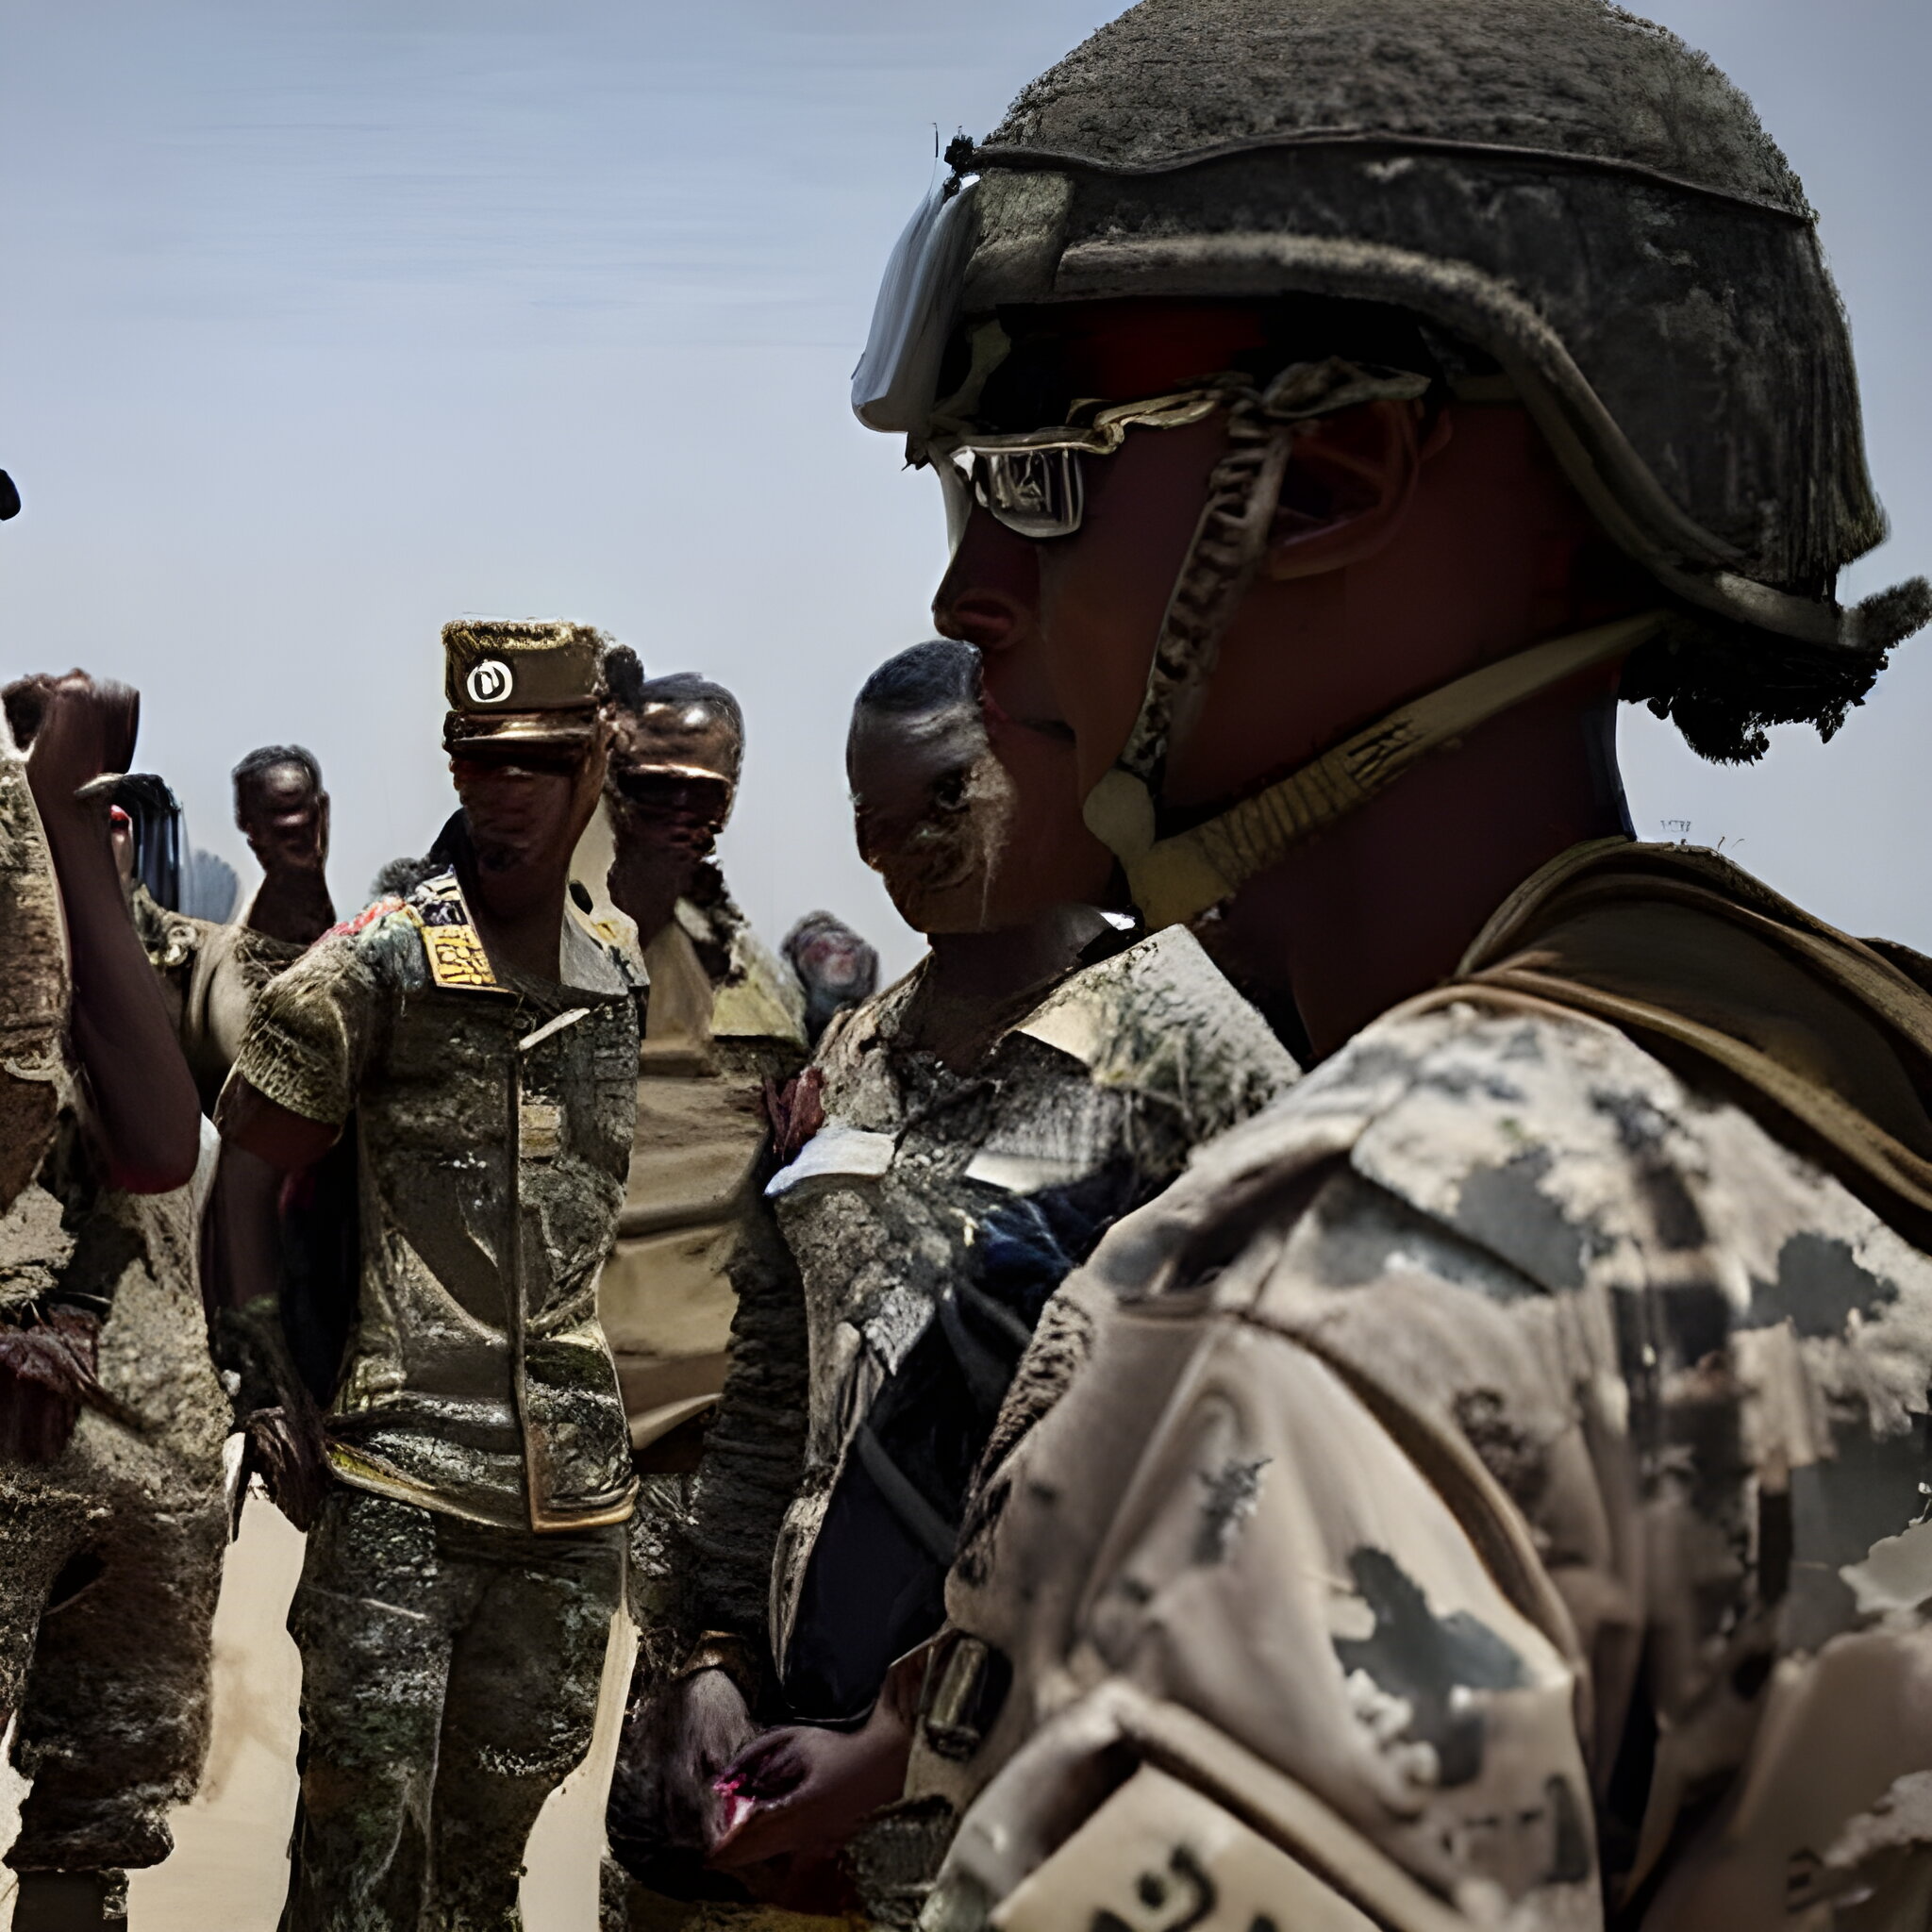 US troops are quietly helping fight ISIS, al-Qaida in West Africa.